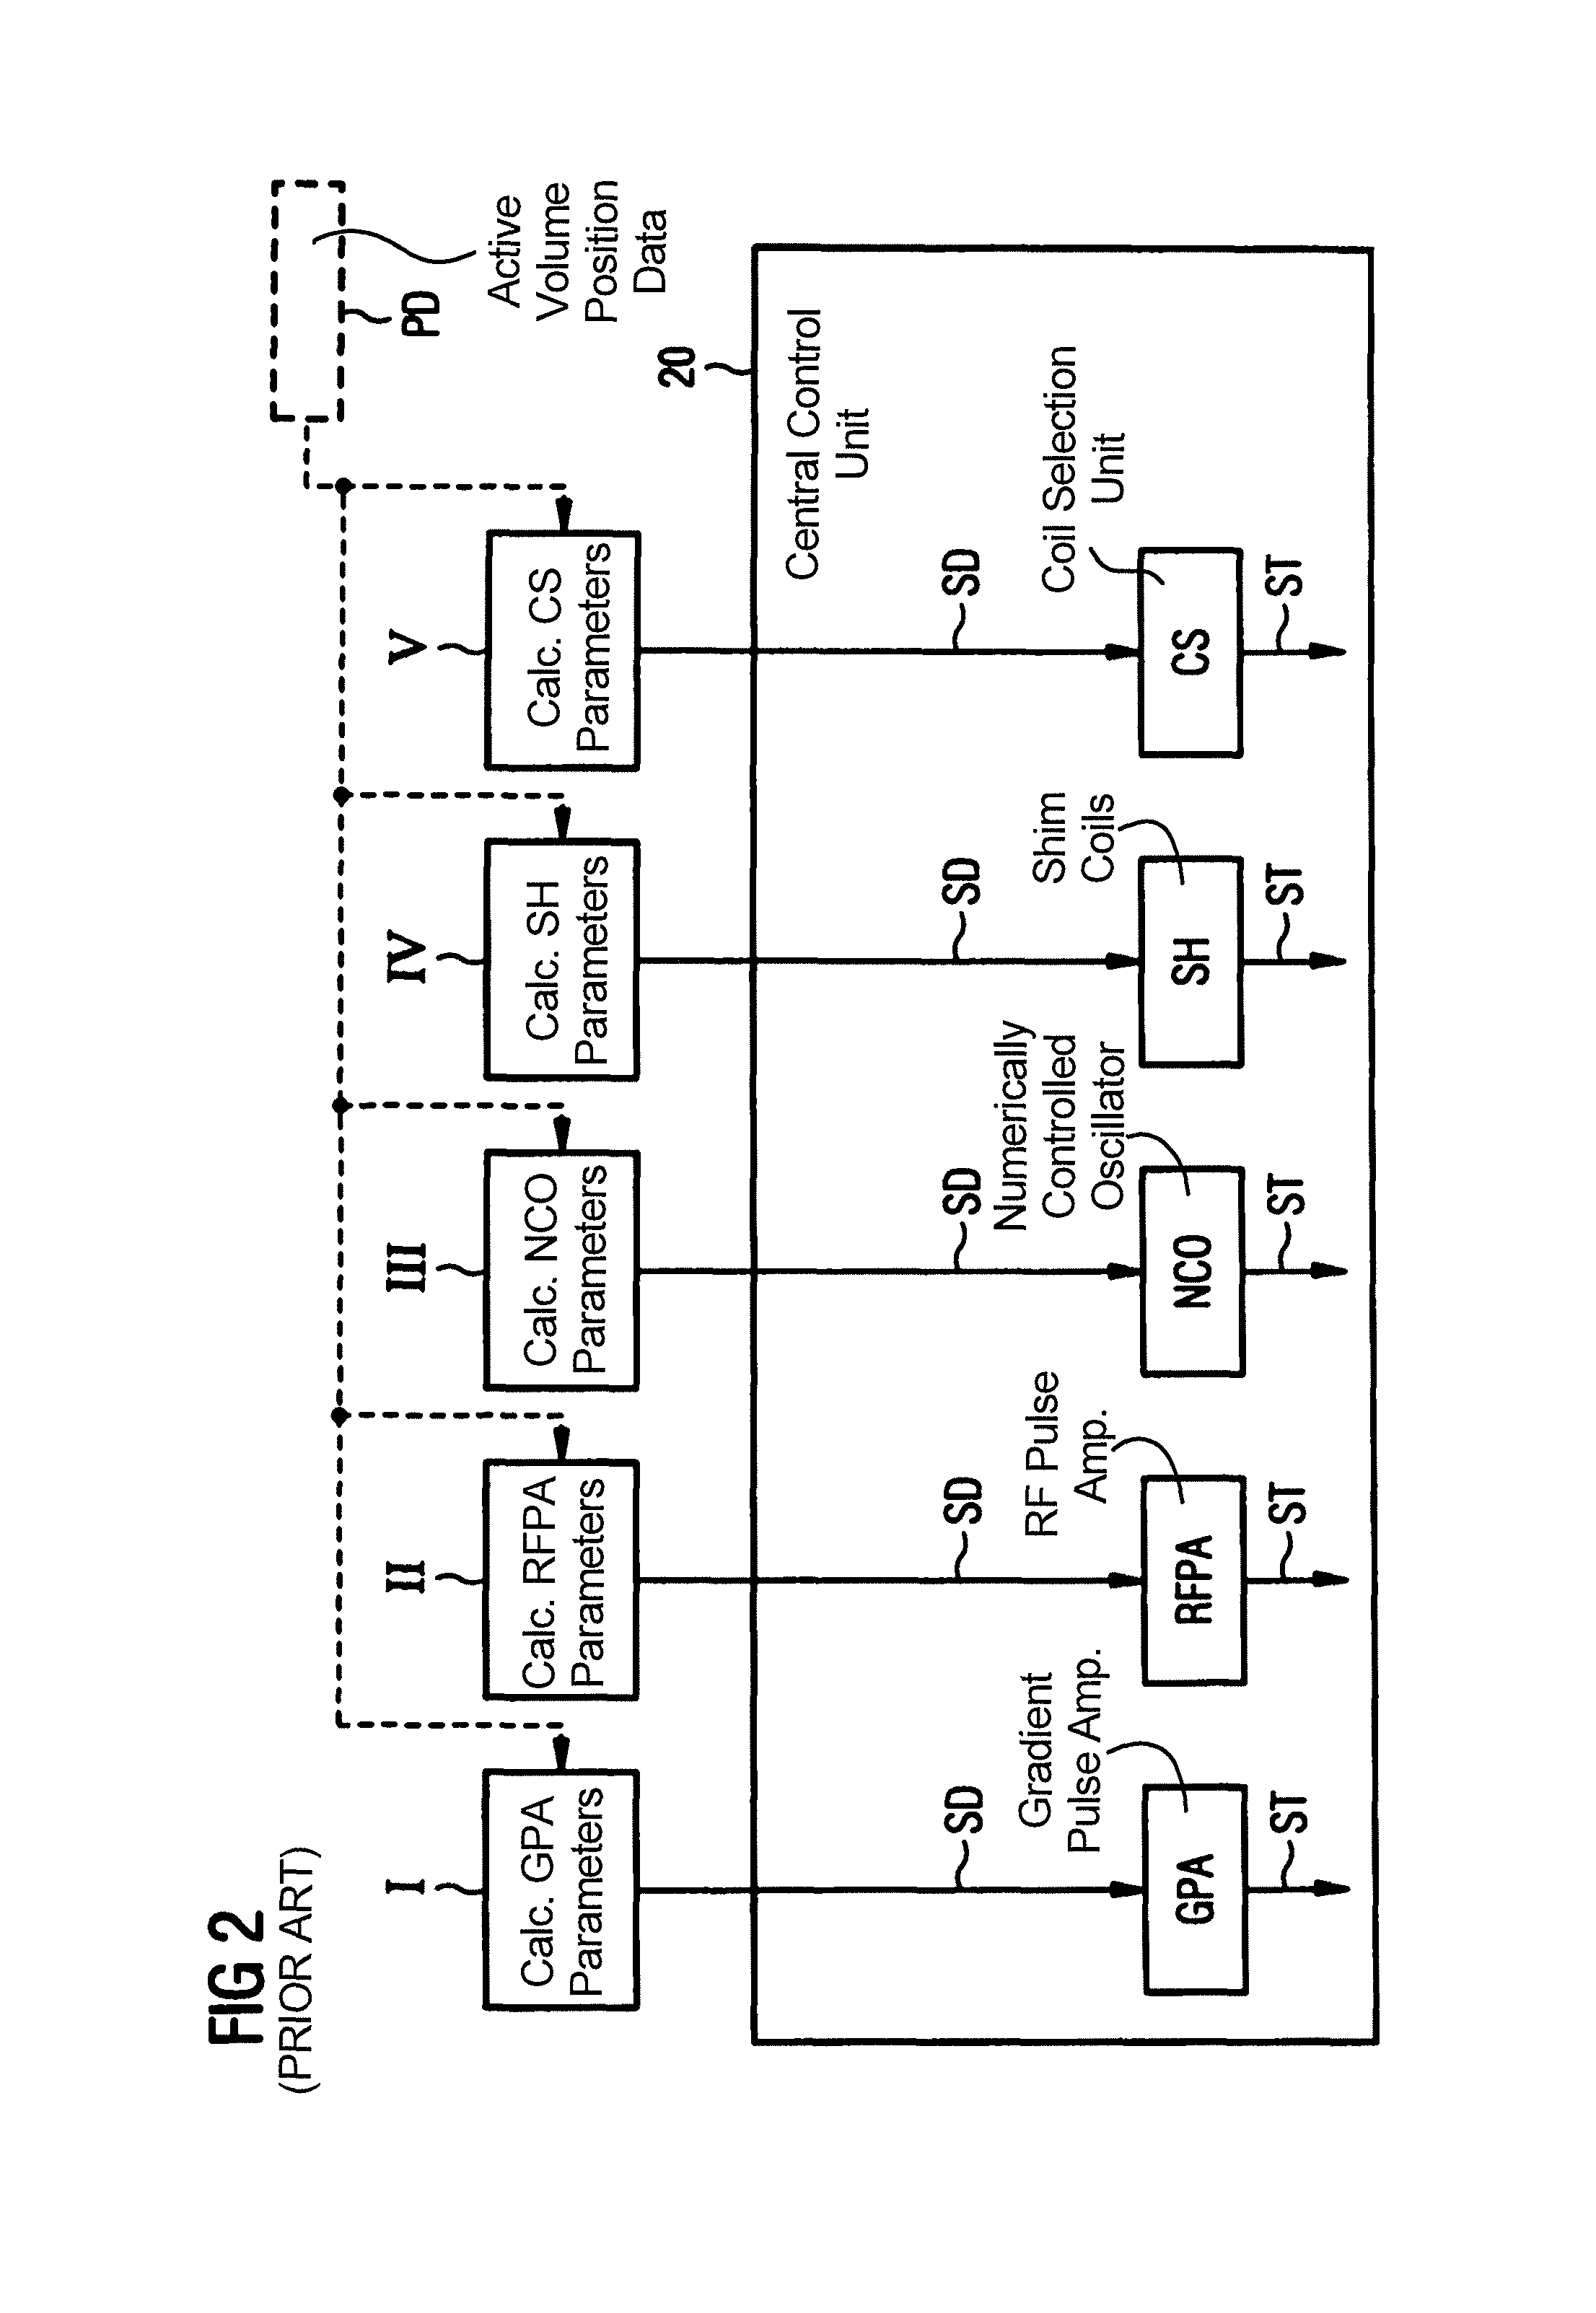 Method of operating an MRI imaging system, while also controlling graadient and shim sub-systems along with the MRI imaging system